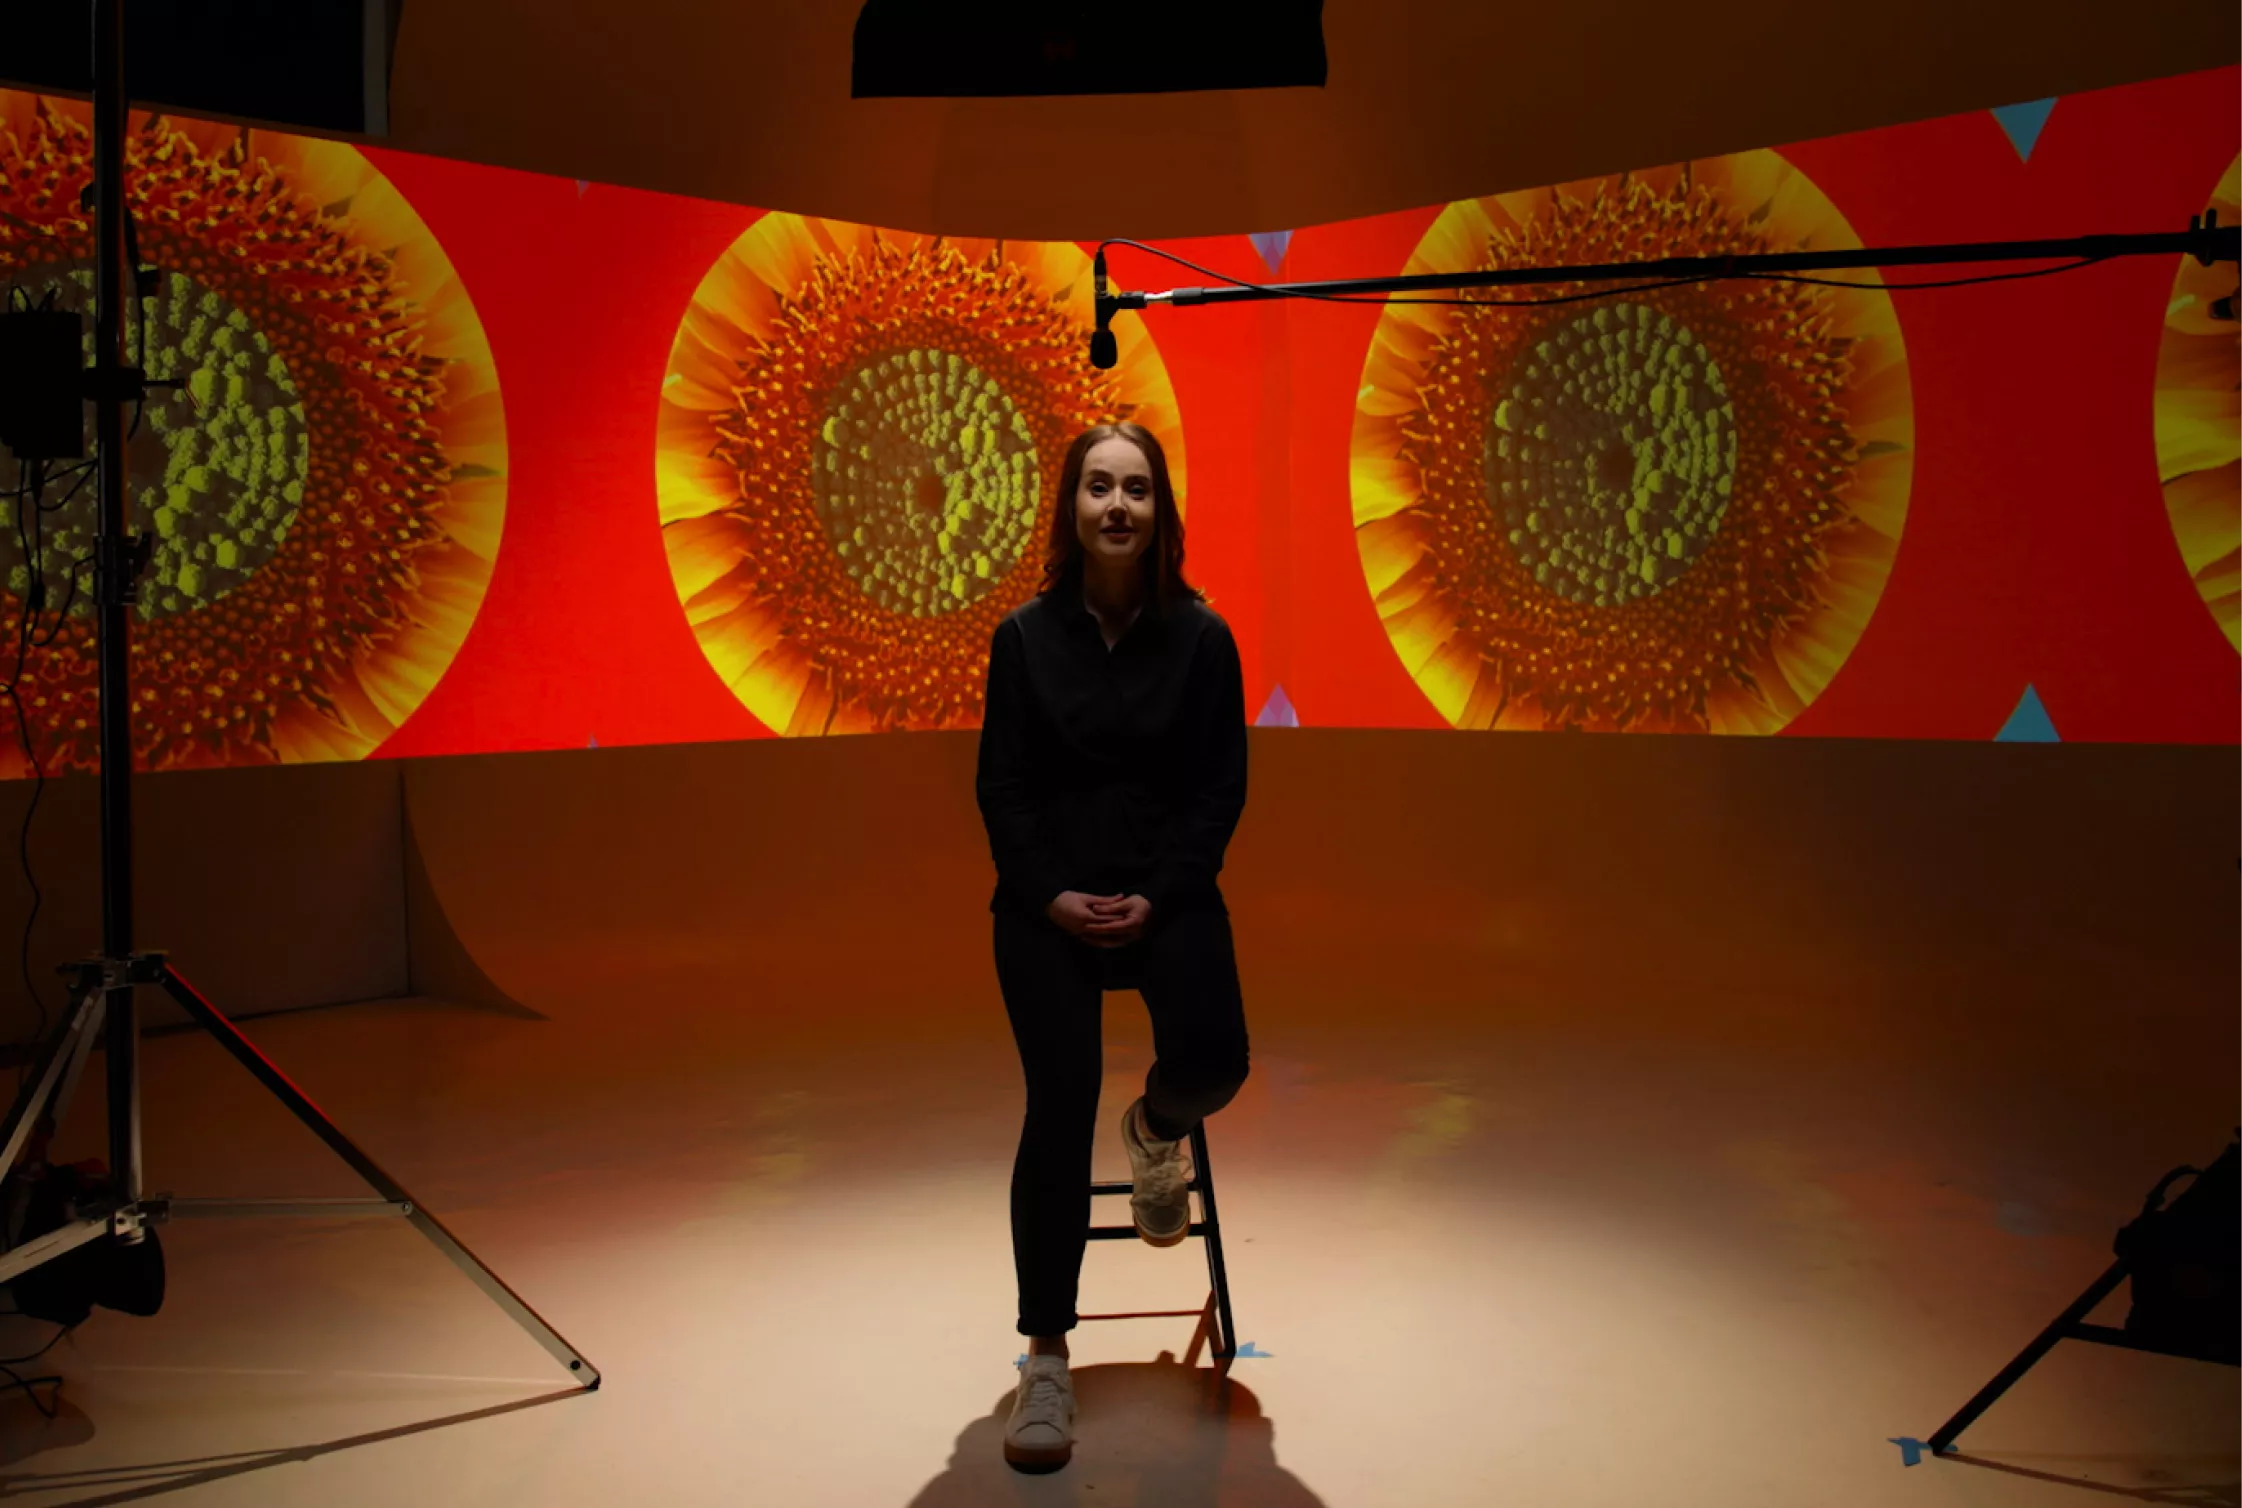 lady sitting in filming studio with projections